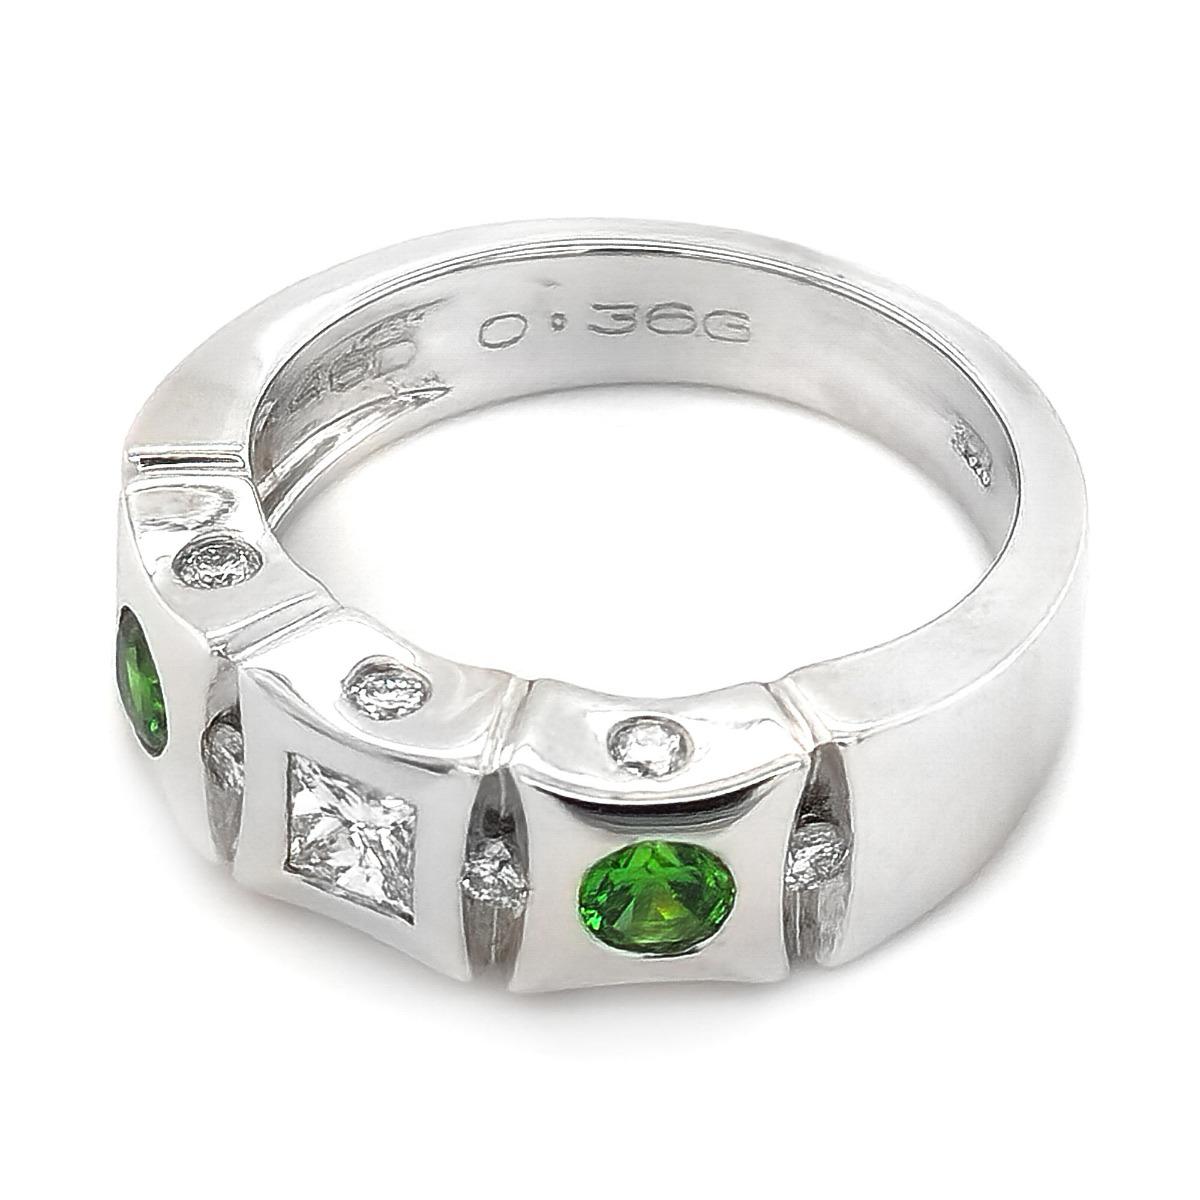 Mined in Russia, these Demantoid garnets set with diamond accents add a dazzling effect. Demantoid garnets are one of the rarest garnet varieties that boast a durability and vivid color. This 14K white gold band s et with two perfectly matched lush